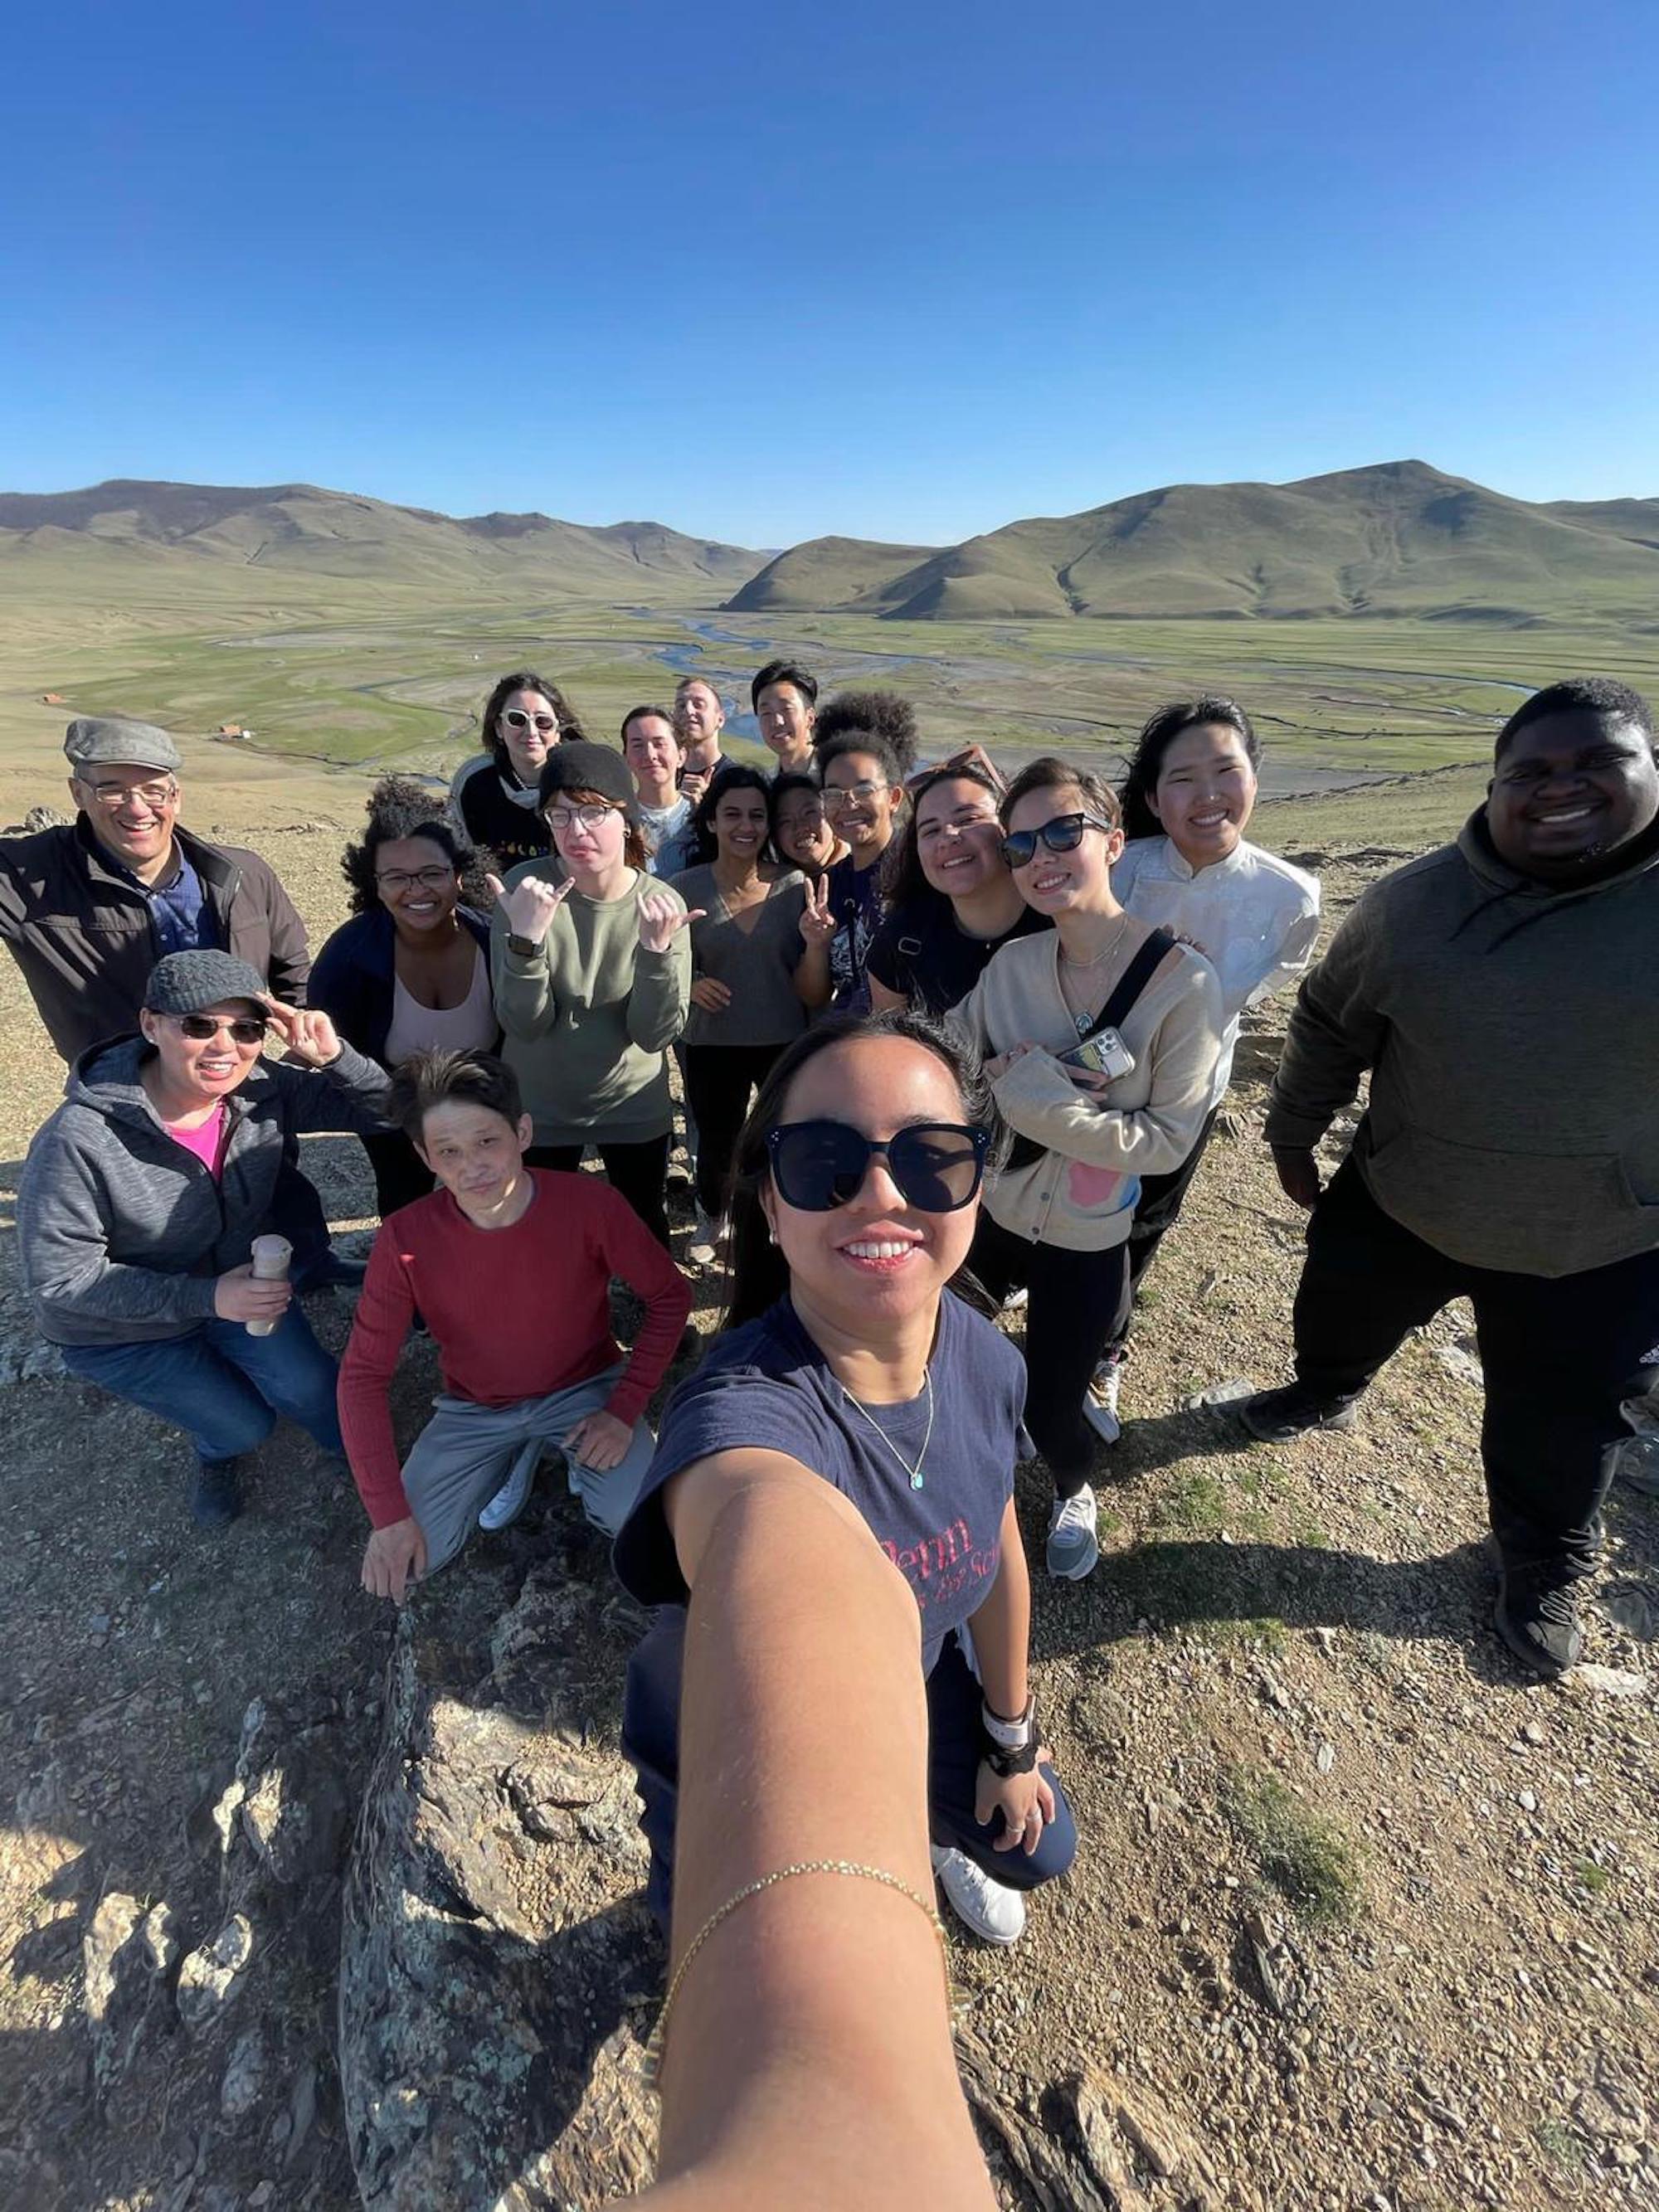 Students take a selfie in the valley of the Orkhon river in Mongolia.